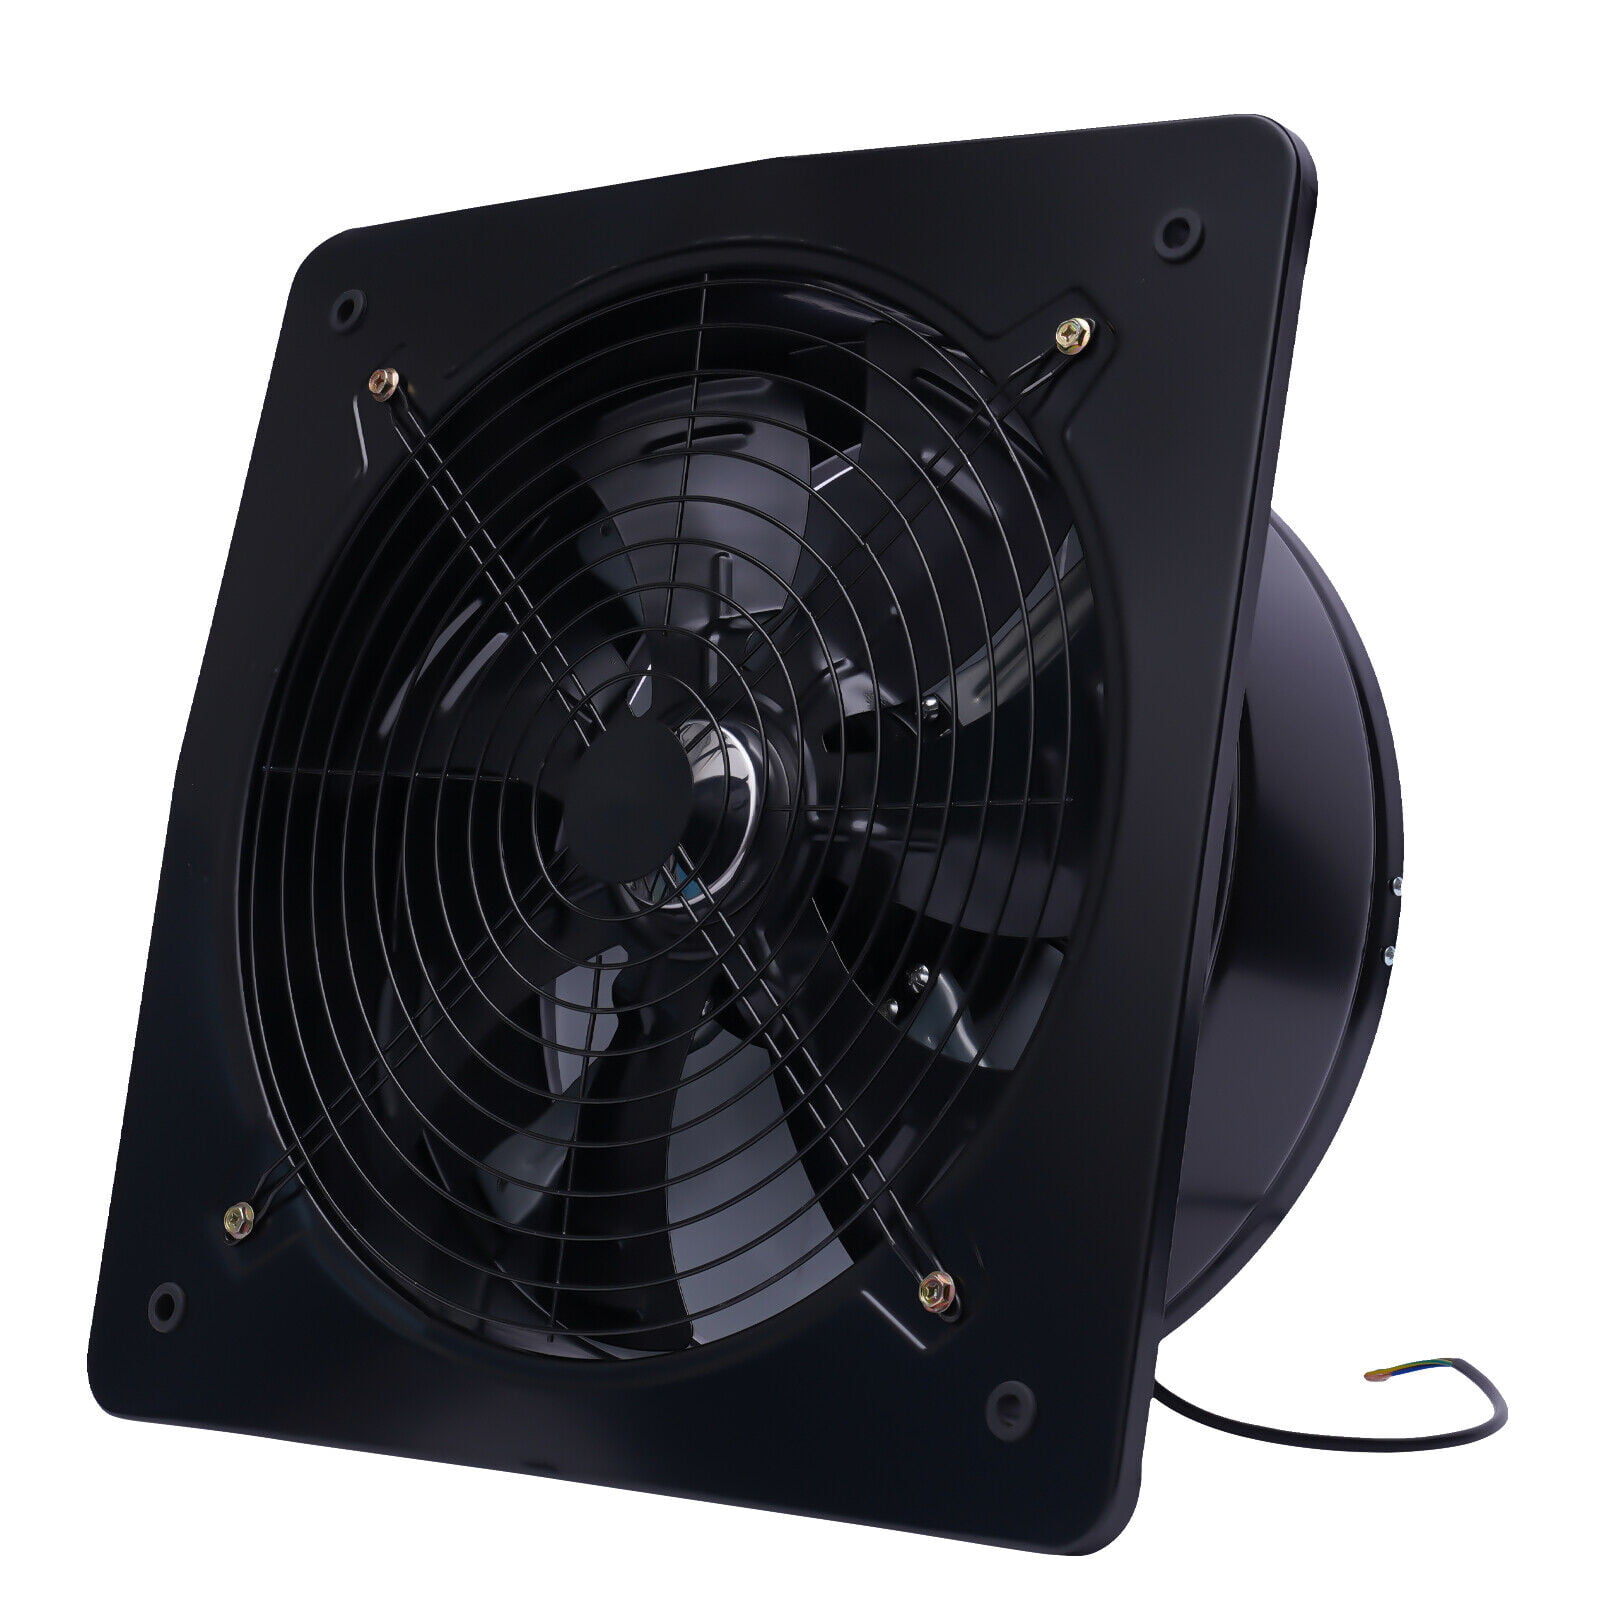 Wholesale industrial extractor fans For Both Domestic And Industrial Uses 